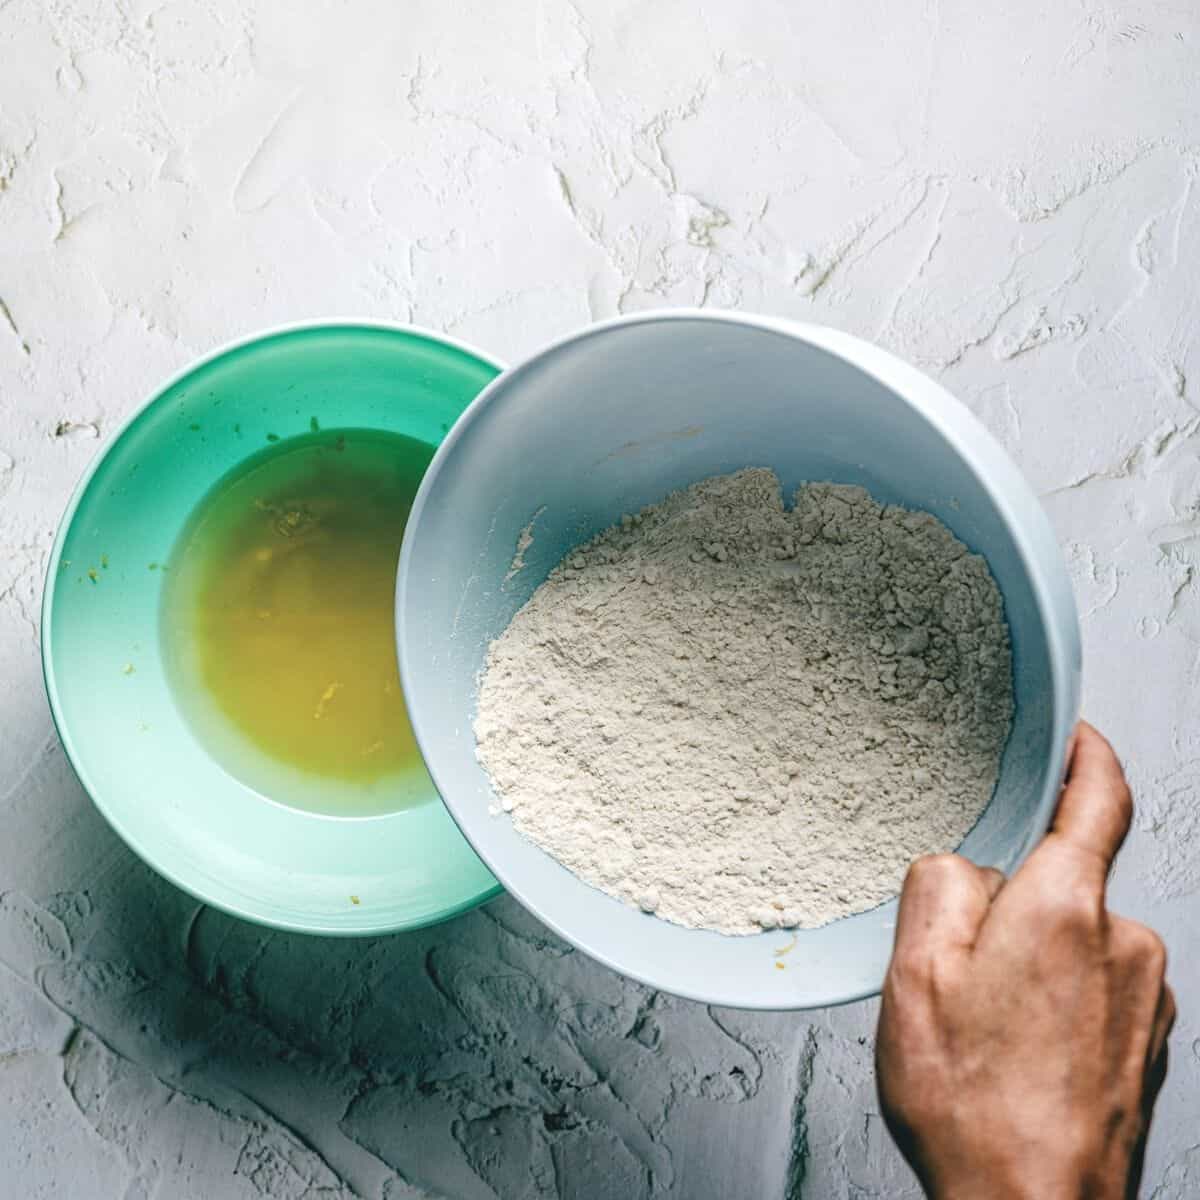 pouring flour to a green bowl filled with olive oil and sugar.